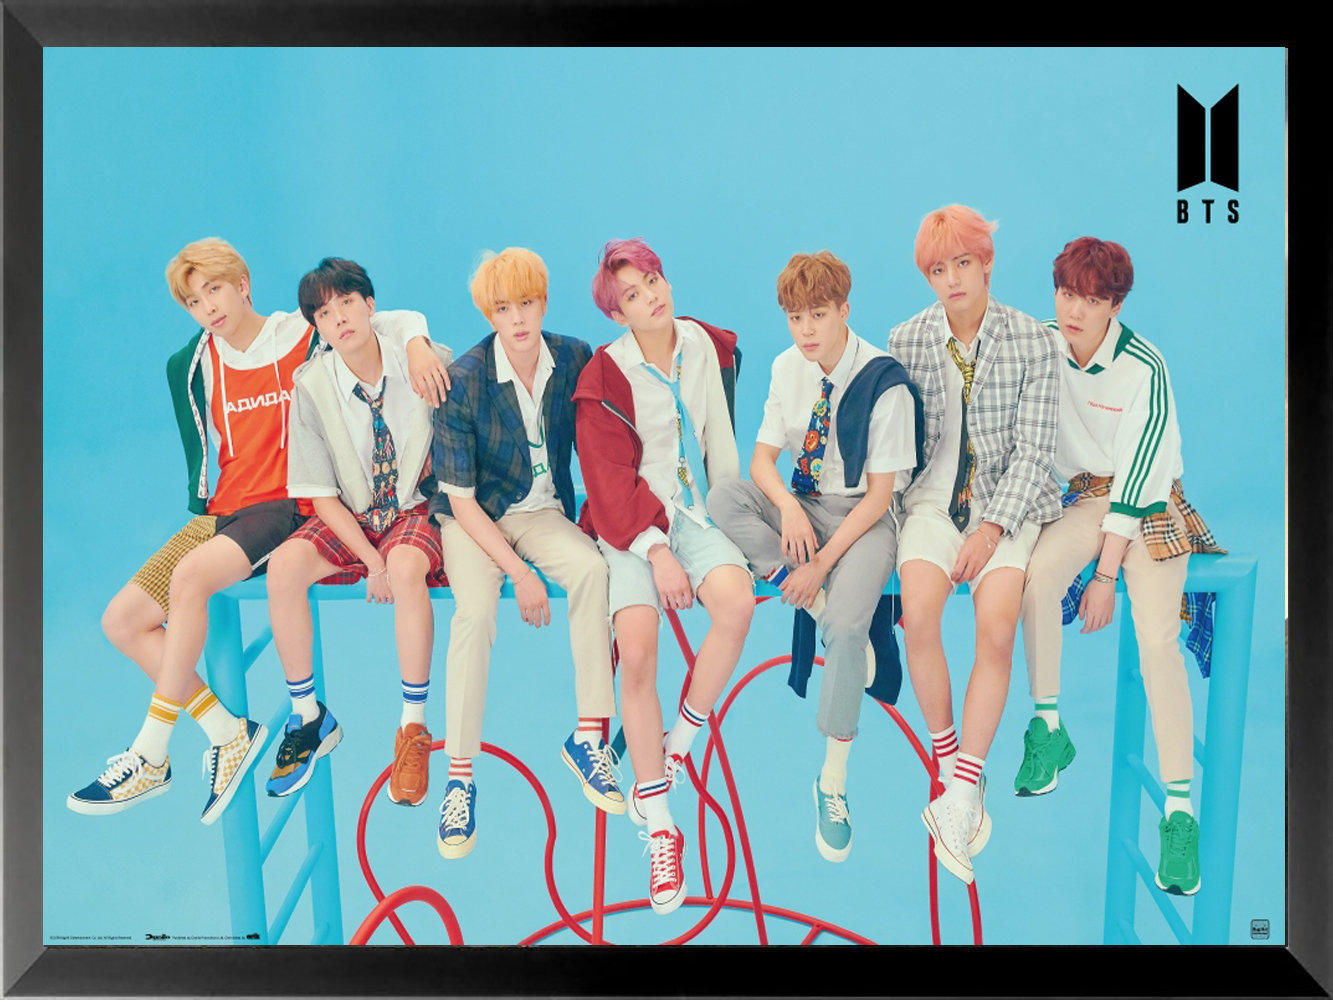 BTS Face Yourself Laminated Poster Print (24 x 36) 